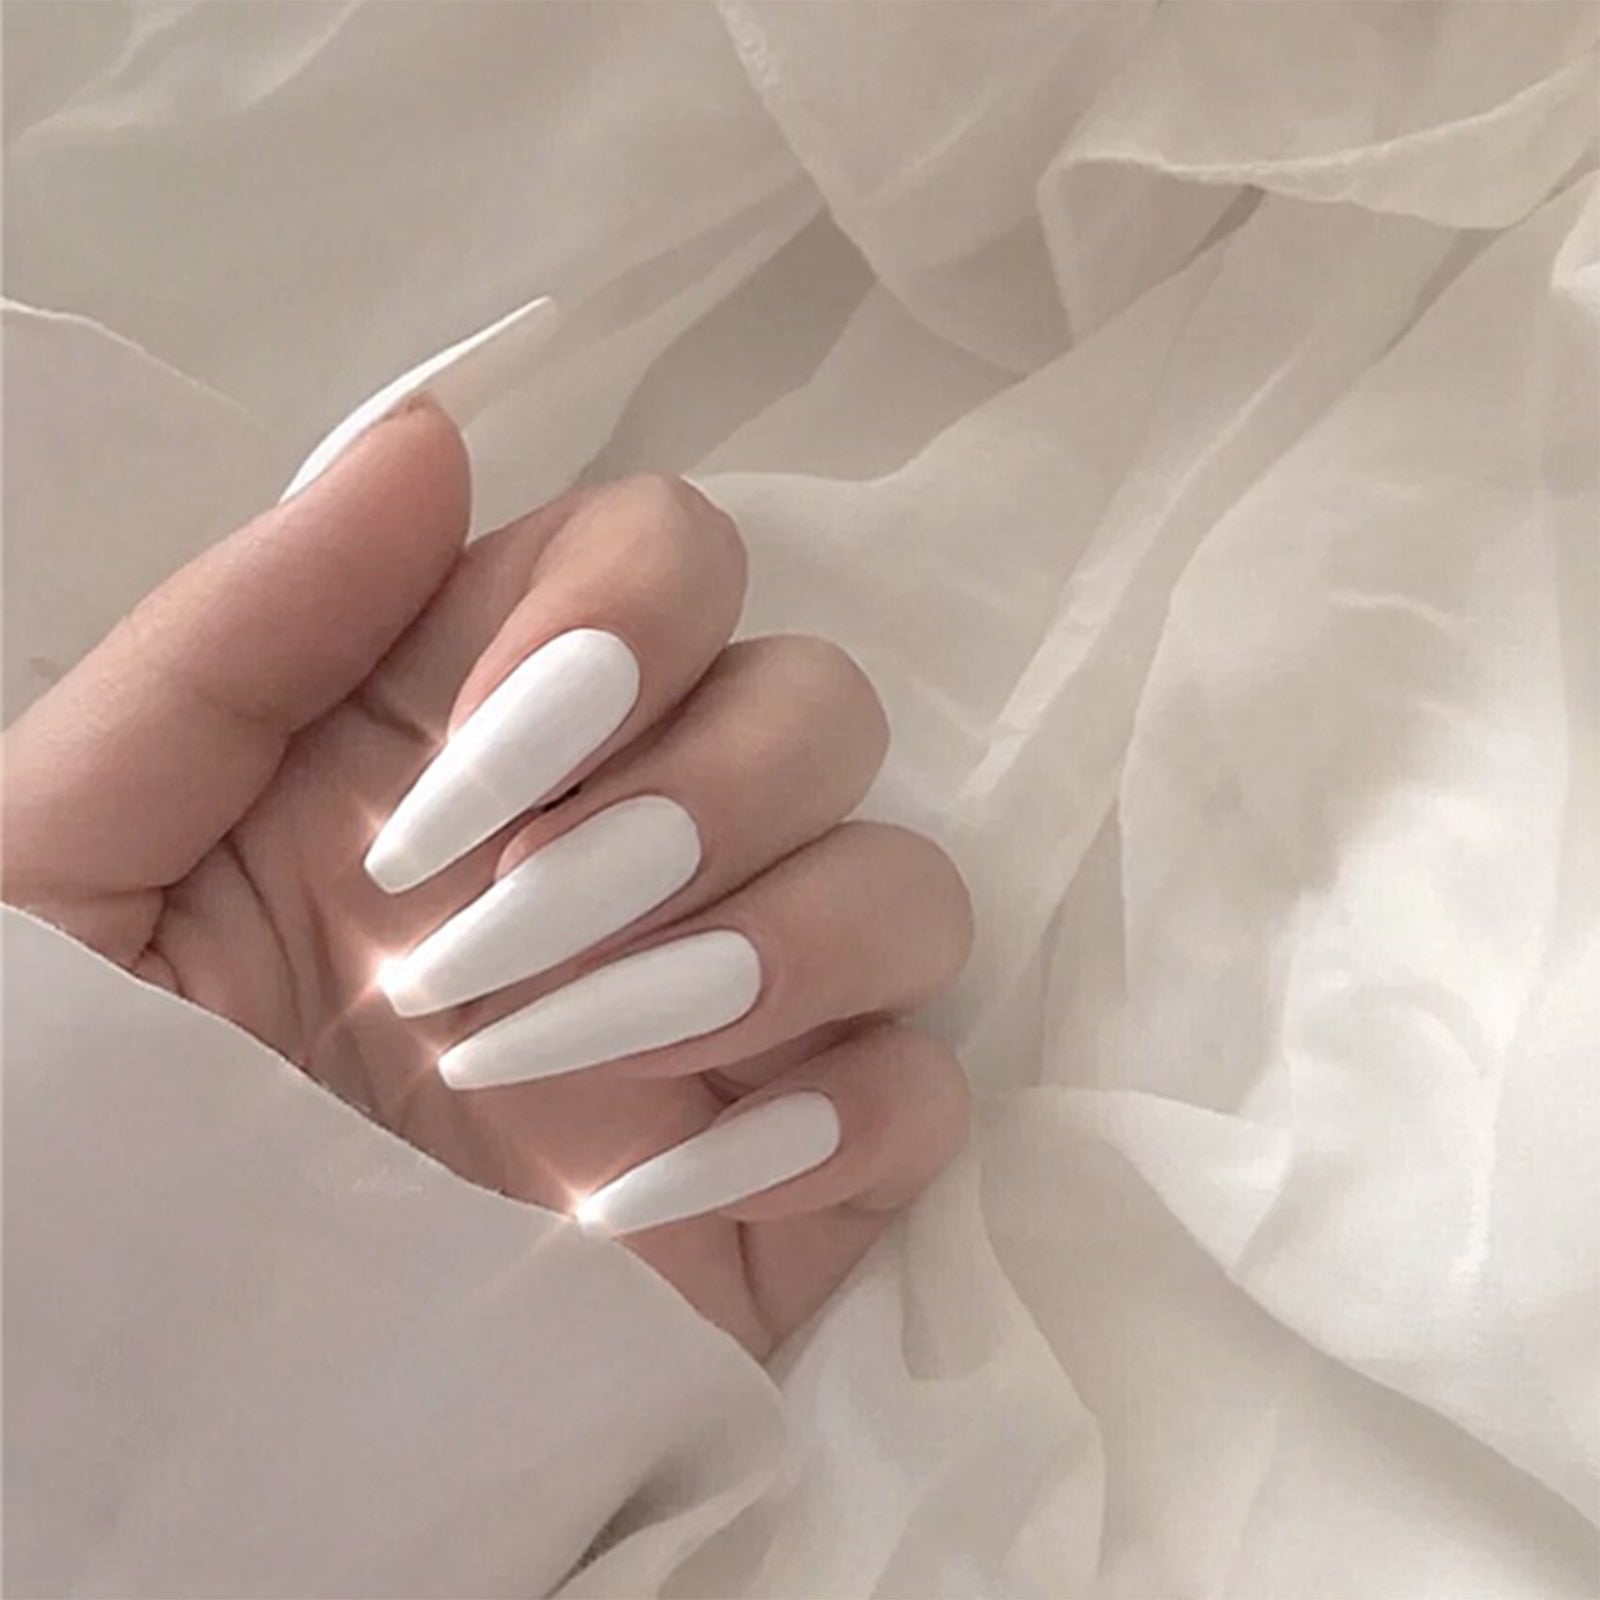 New Gradient Style Matte Full Coverage Long Ballet False Nail Tips  2020 Trend Nail Art French Manicure Tools Dropshipping 24Pcs